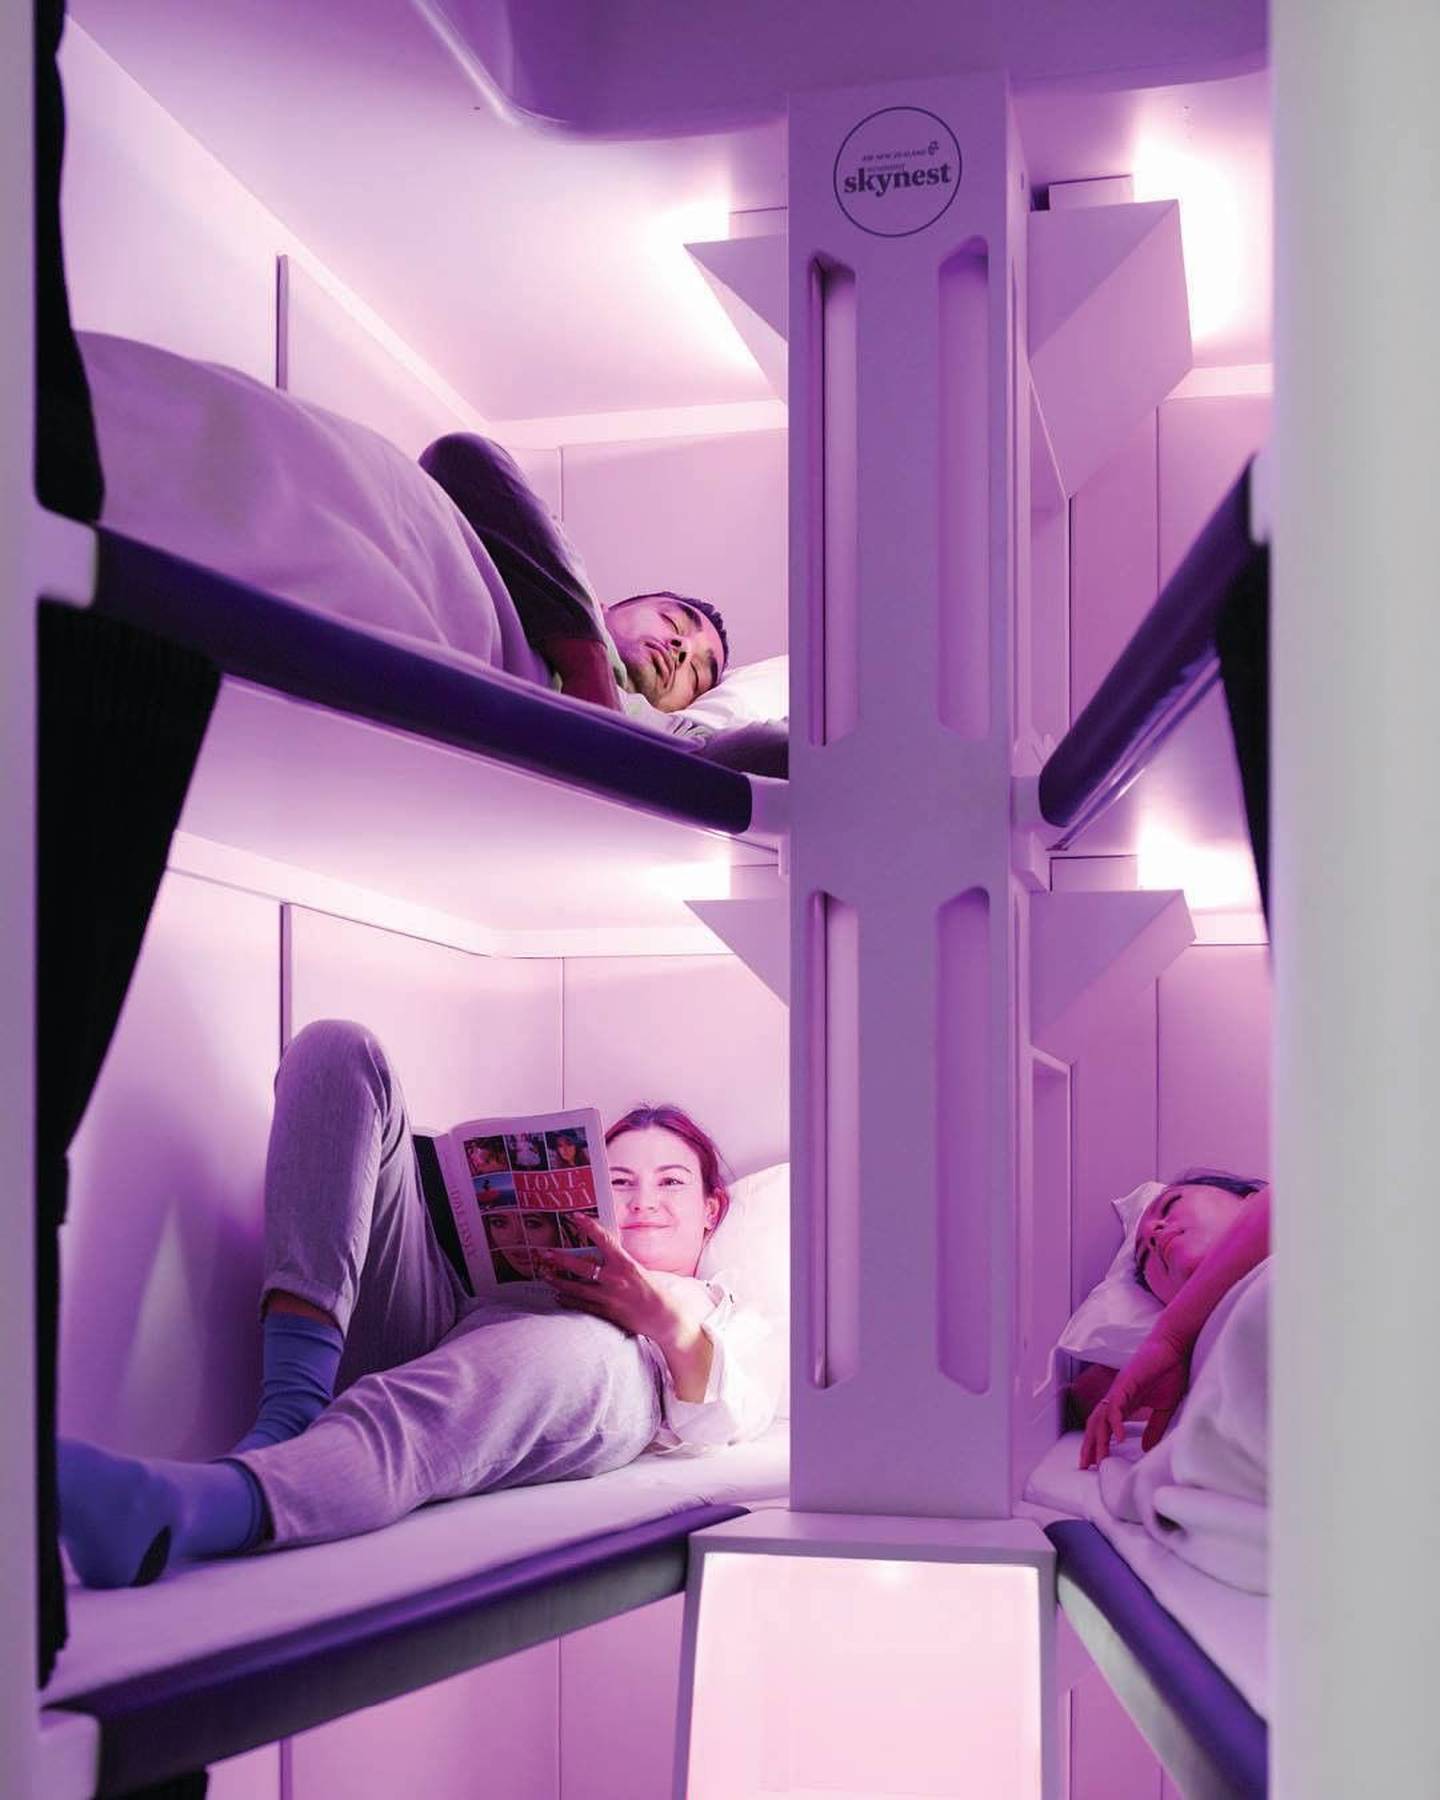 The SkyNest pods will be fitted on the airline’s new Dreamliner aircraft. Photo: Air New Zealand